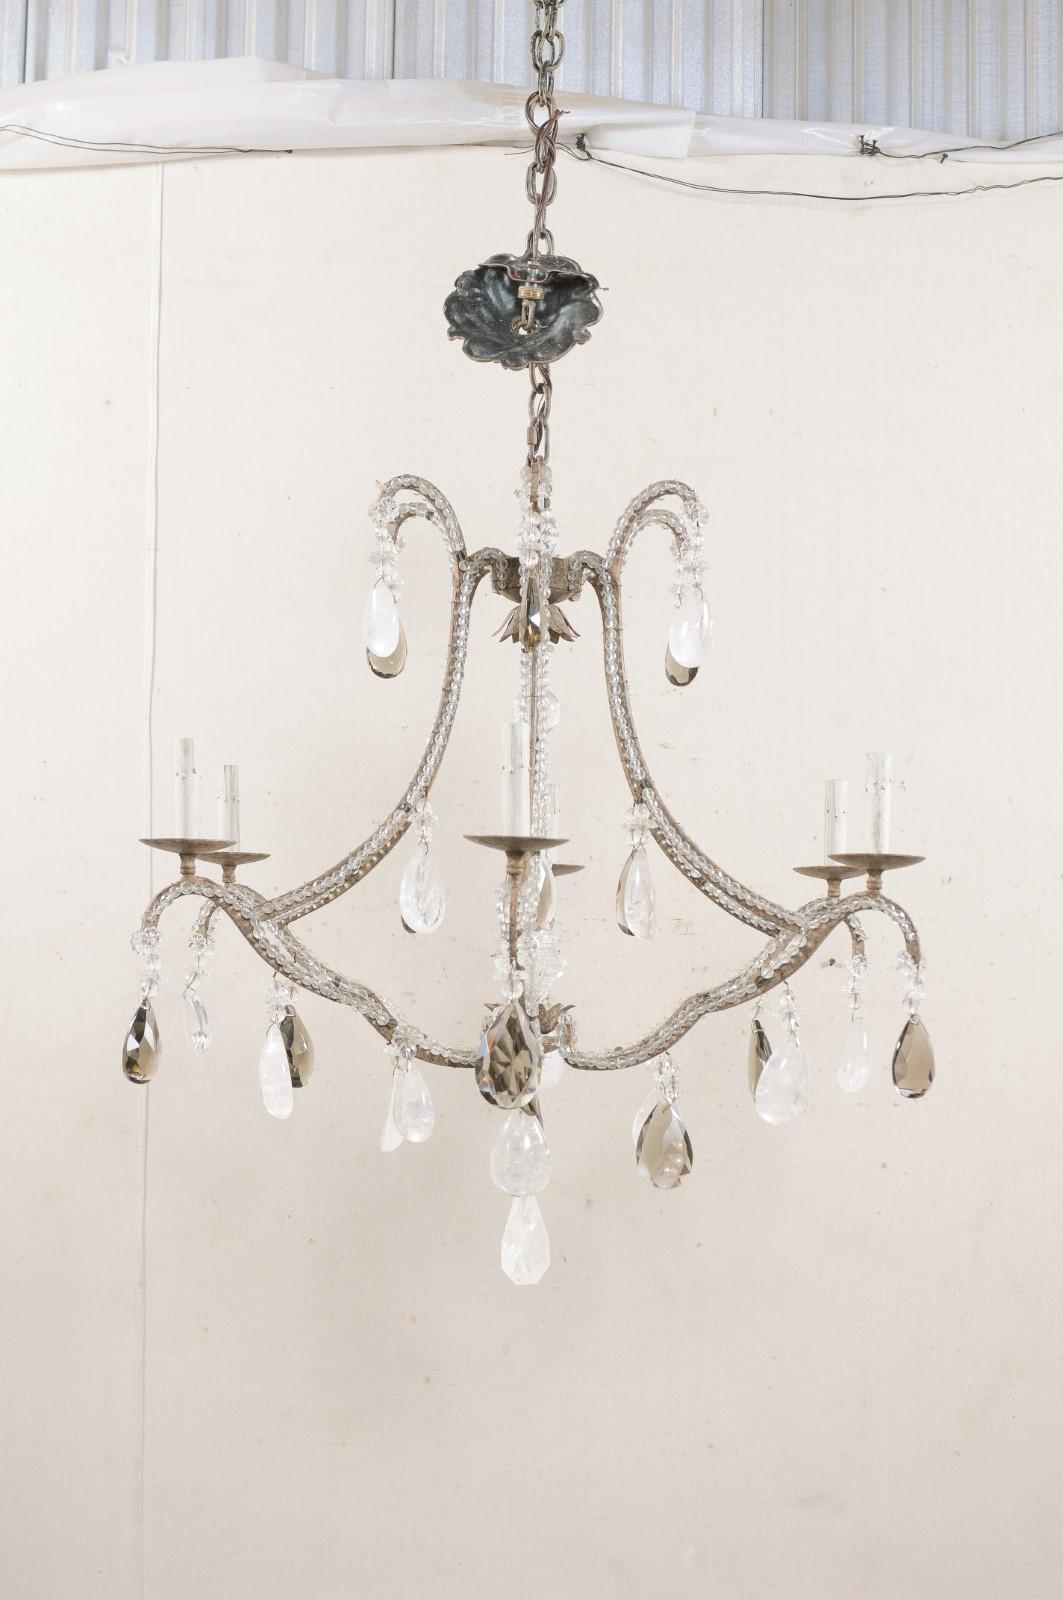 An American six-light chandelier adorn in rock and smoky crystals. This vintage chandelier features delicately scrolled body adorn with various smoke and rock crystals, iron armature lined with glass beading along it's structure, a waterfall